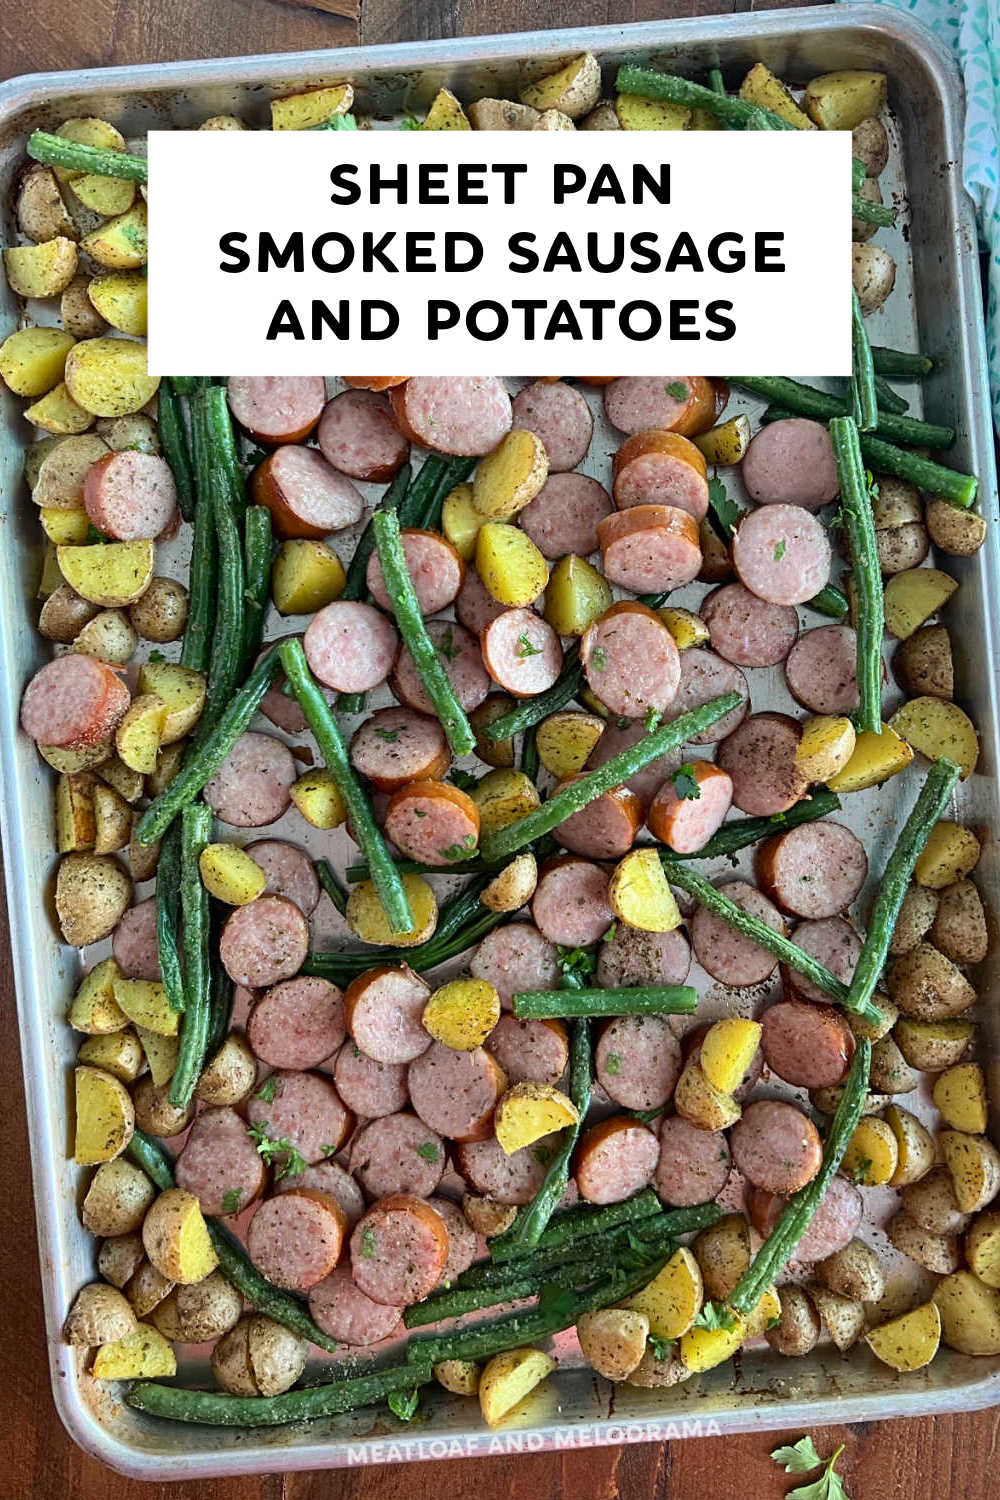 This Sheet Pan Smoked Sausage and Potatoes recipe with green beans is an easy weeknight meal with few ingredients that the whole family will love. It is super easy to make, takes just 25 minutes to bake, and clean-up is easy, too! via @meamel